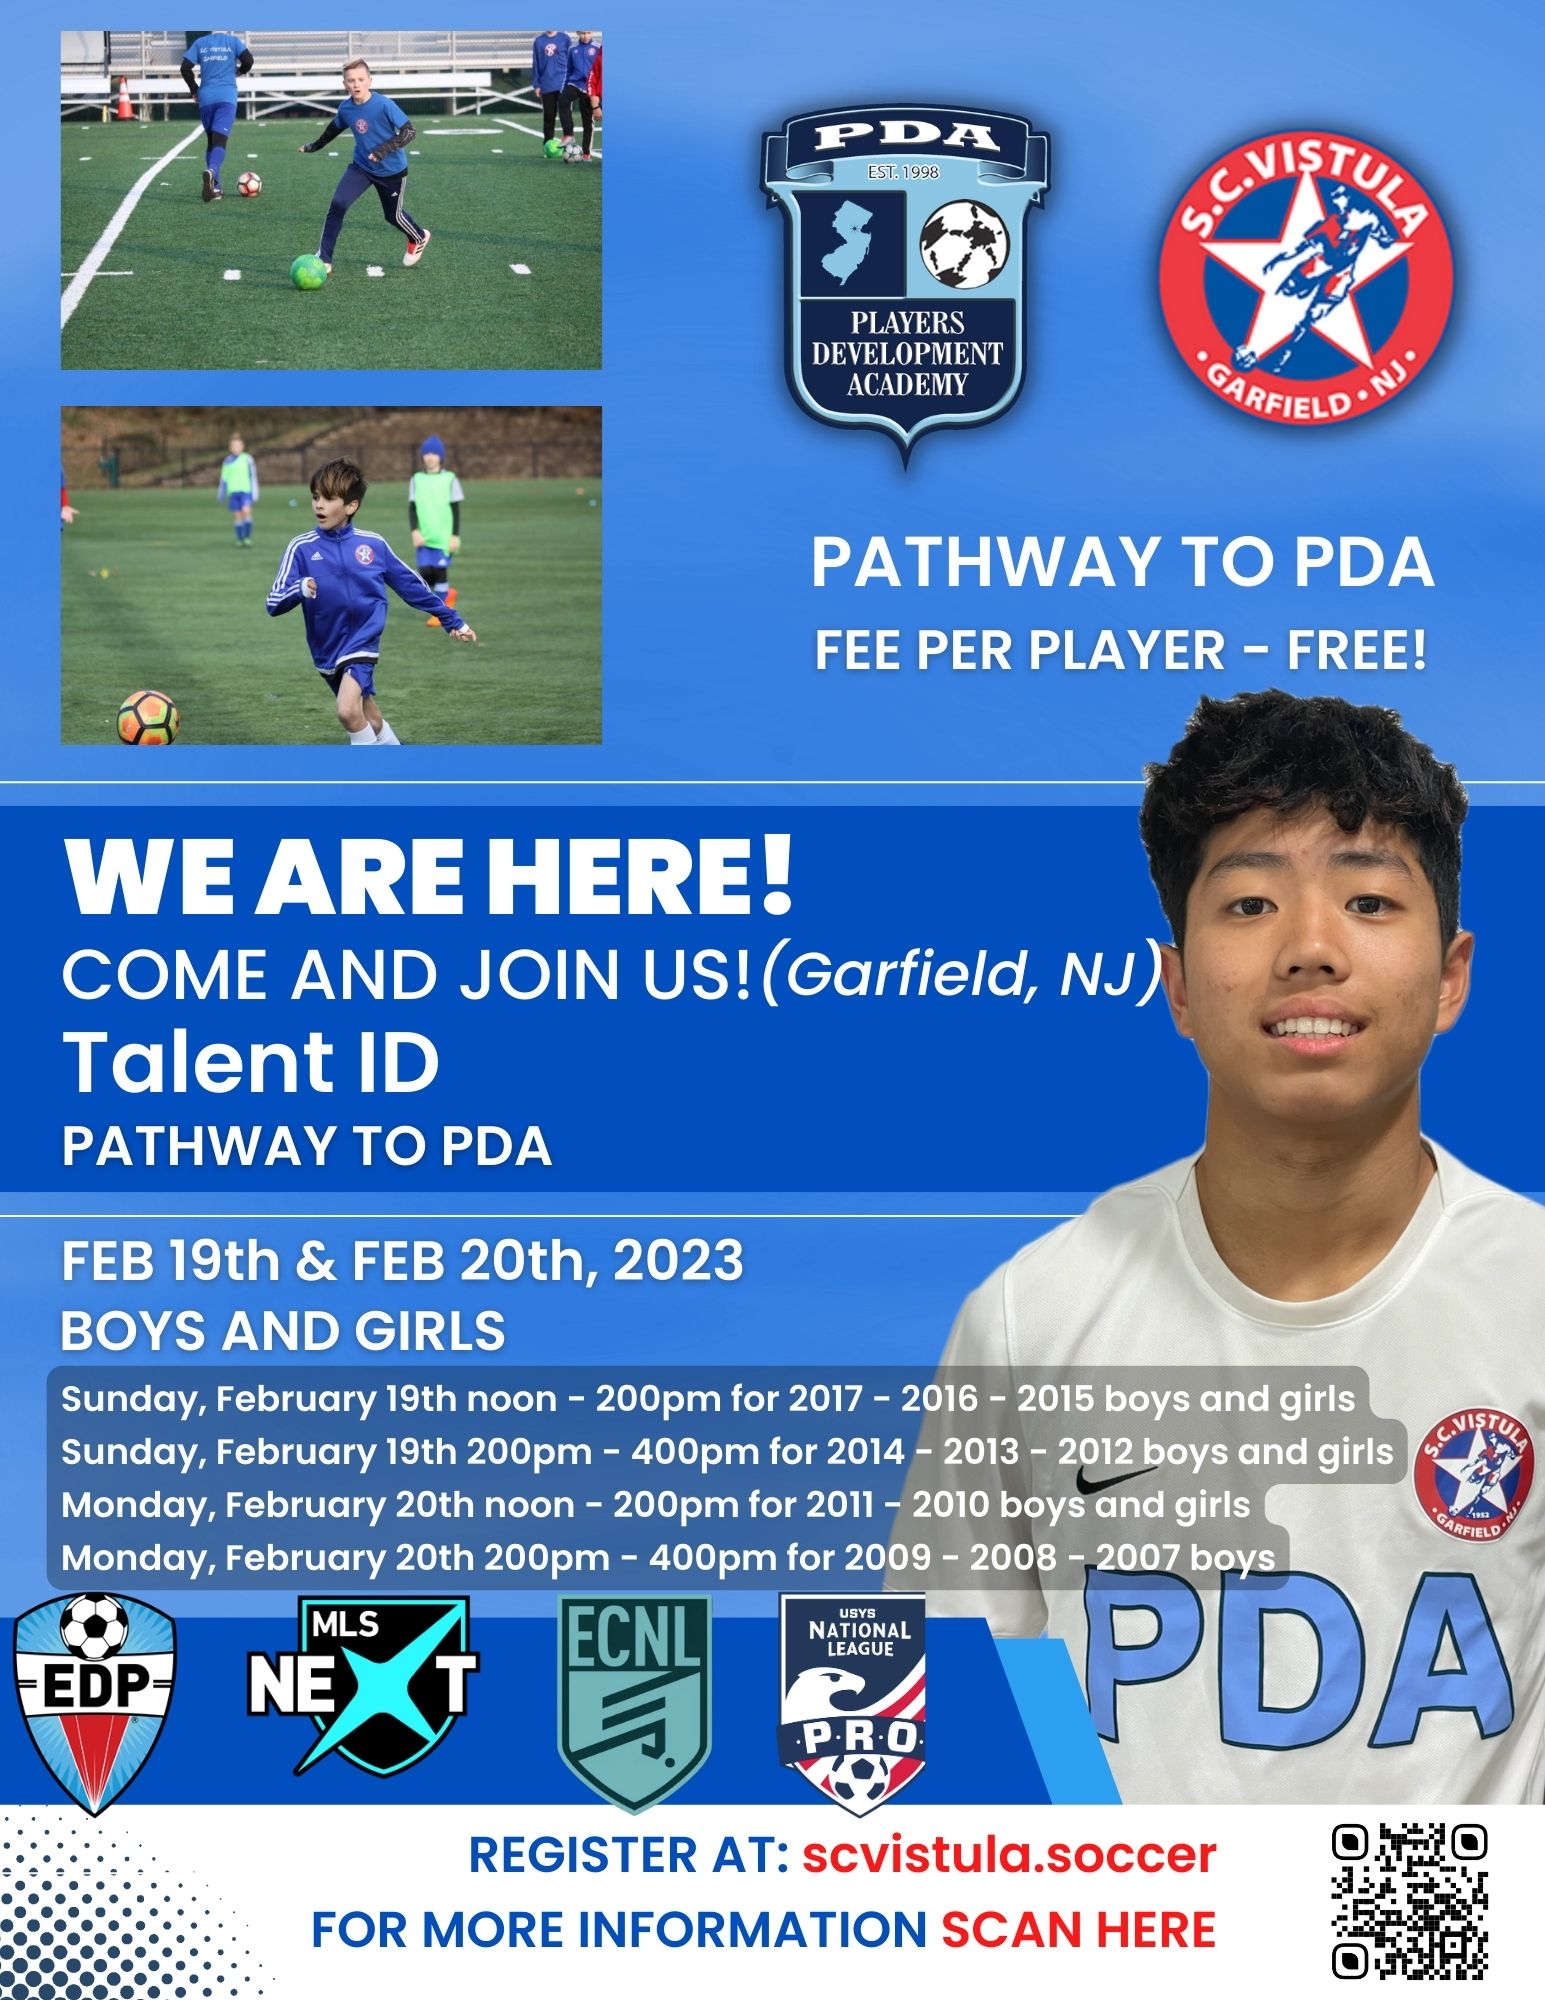 PDA / SC VISTULA is opening tryouts and opening pathway to PDA and